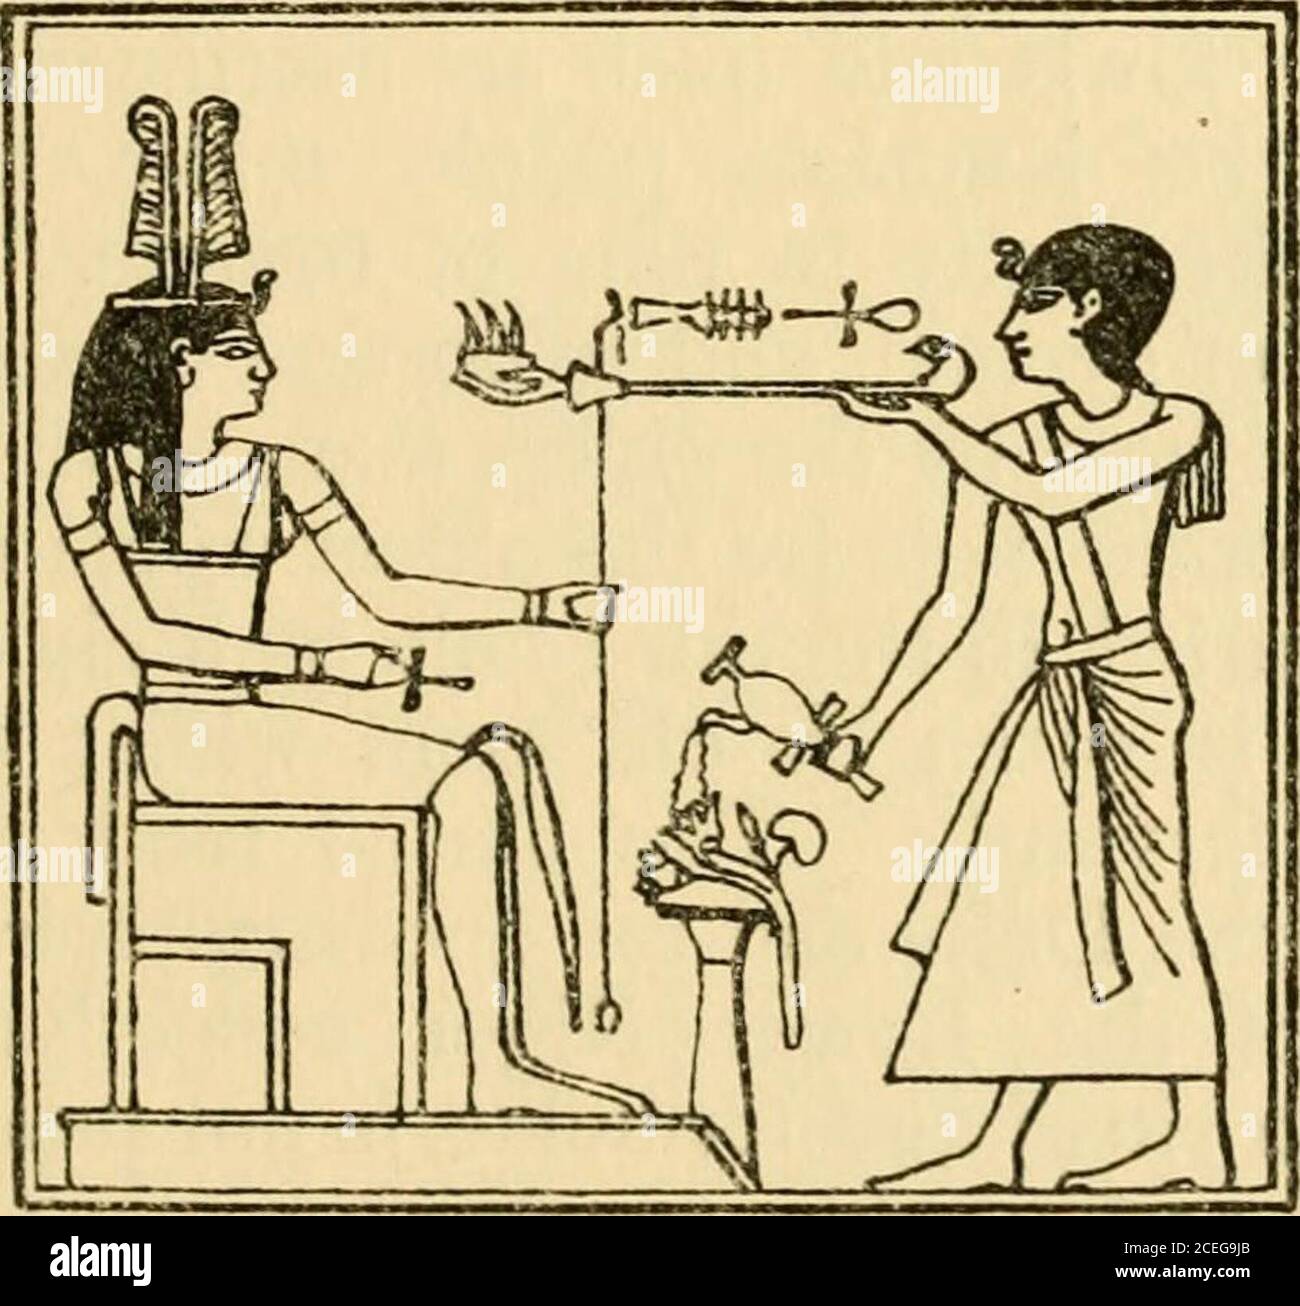 . Osiris and the Egyptian resurrection;. Seti I offering incense to Osiris.Marietta, Abydos, Vol. I, p. 39.. Seti I pouring out a libation and offering incense to Osiris-Seker.Mariette, Abydos, Vol. I, p. 36. to the great deity Jo-uk once a year, at the beginningof the rainy season ; the intermediary between Jo-ukand man is the demi-god Nyakang, whose mother waspart woman, part crocodile. An animal is slain in each ^ The Anglo-Egyptian Sudan, p. 162. S 2 26o Osiris and the Egyptian Resurrection village by the priest of the village, and the people cookand eat the flesh, assembling for the purpo Stock Photo